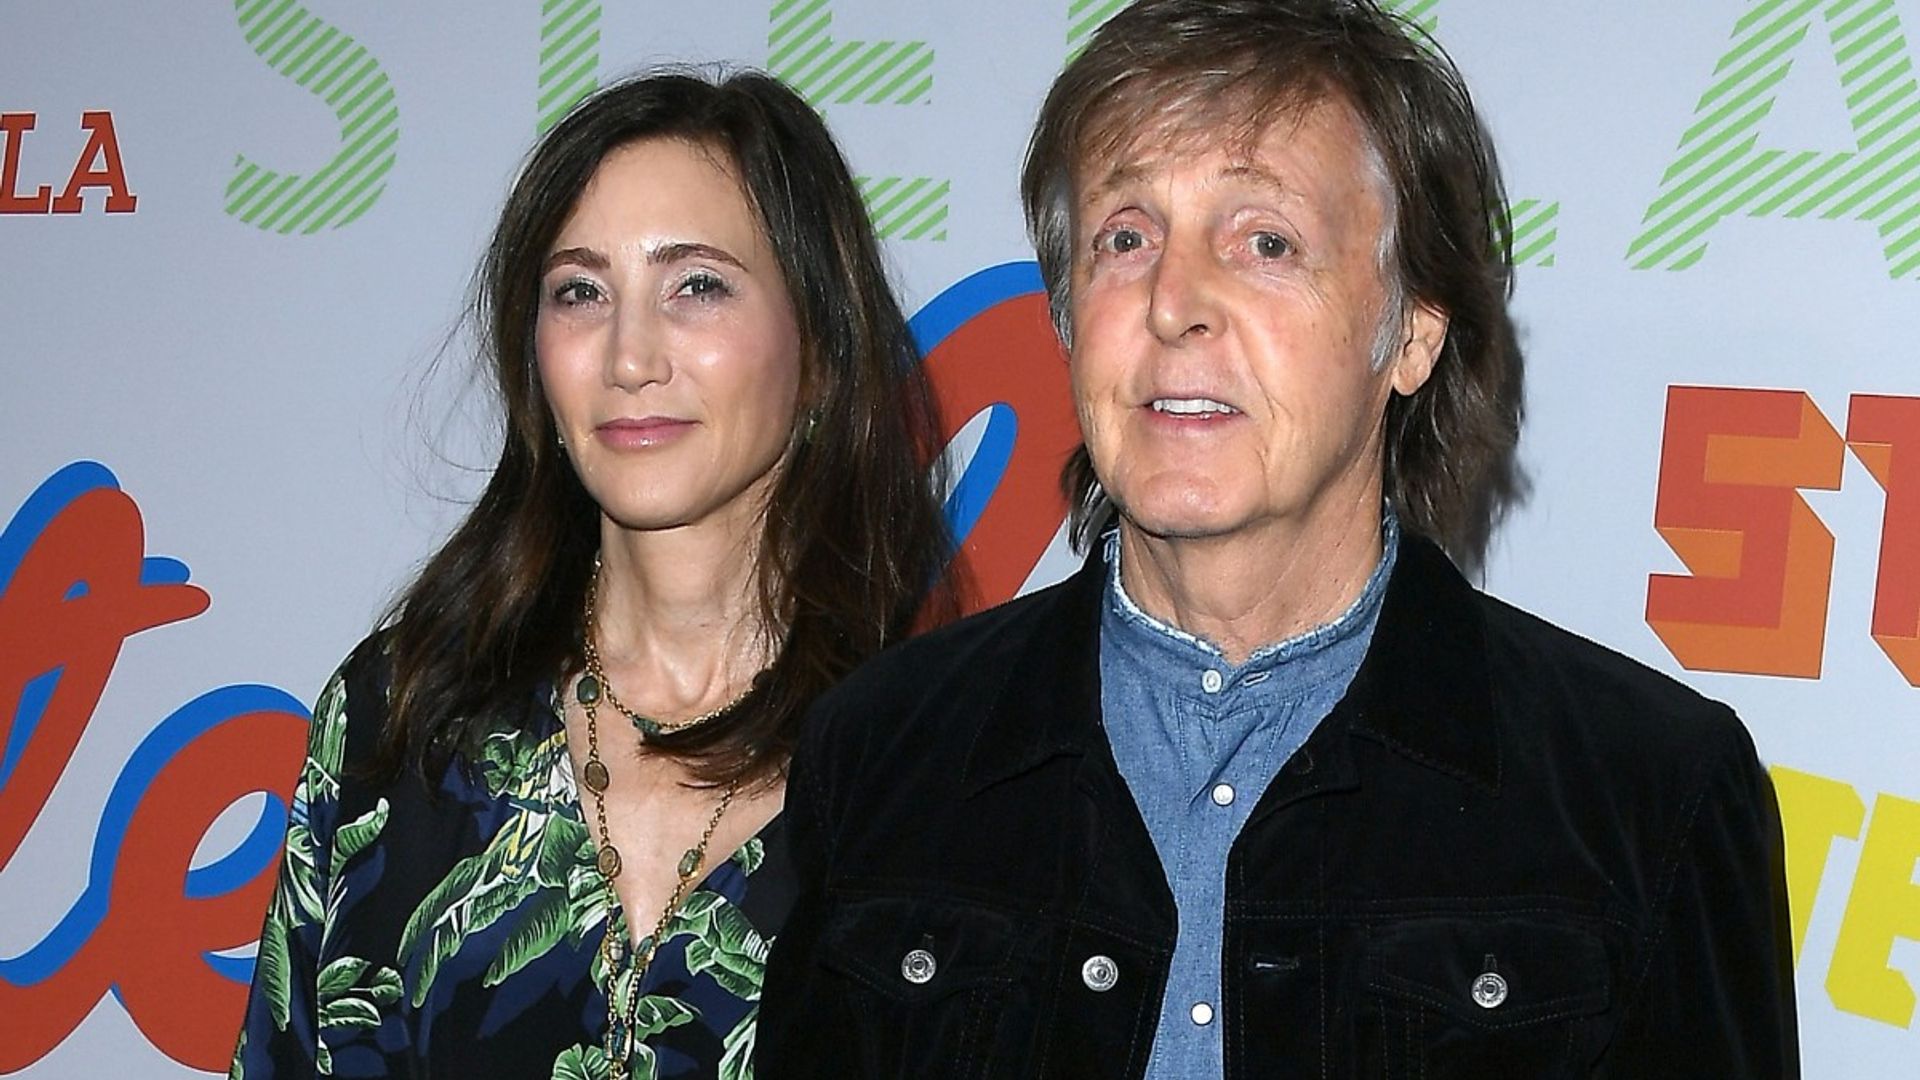 Paul McCartney and wife Nancy Shevell look so in love as they cuddle up